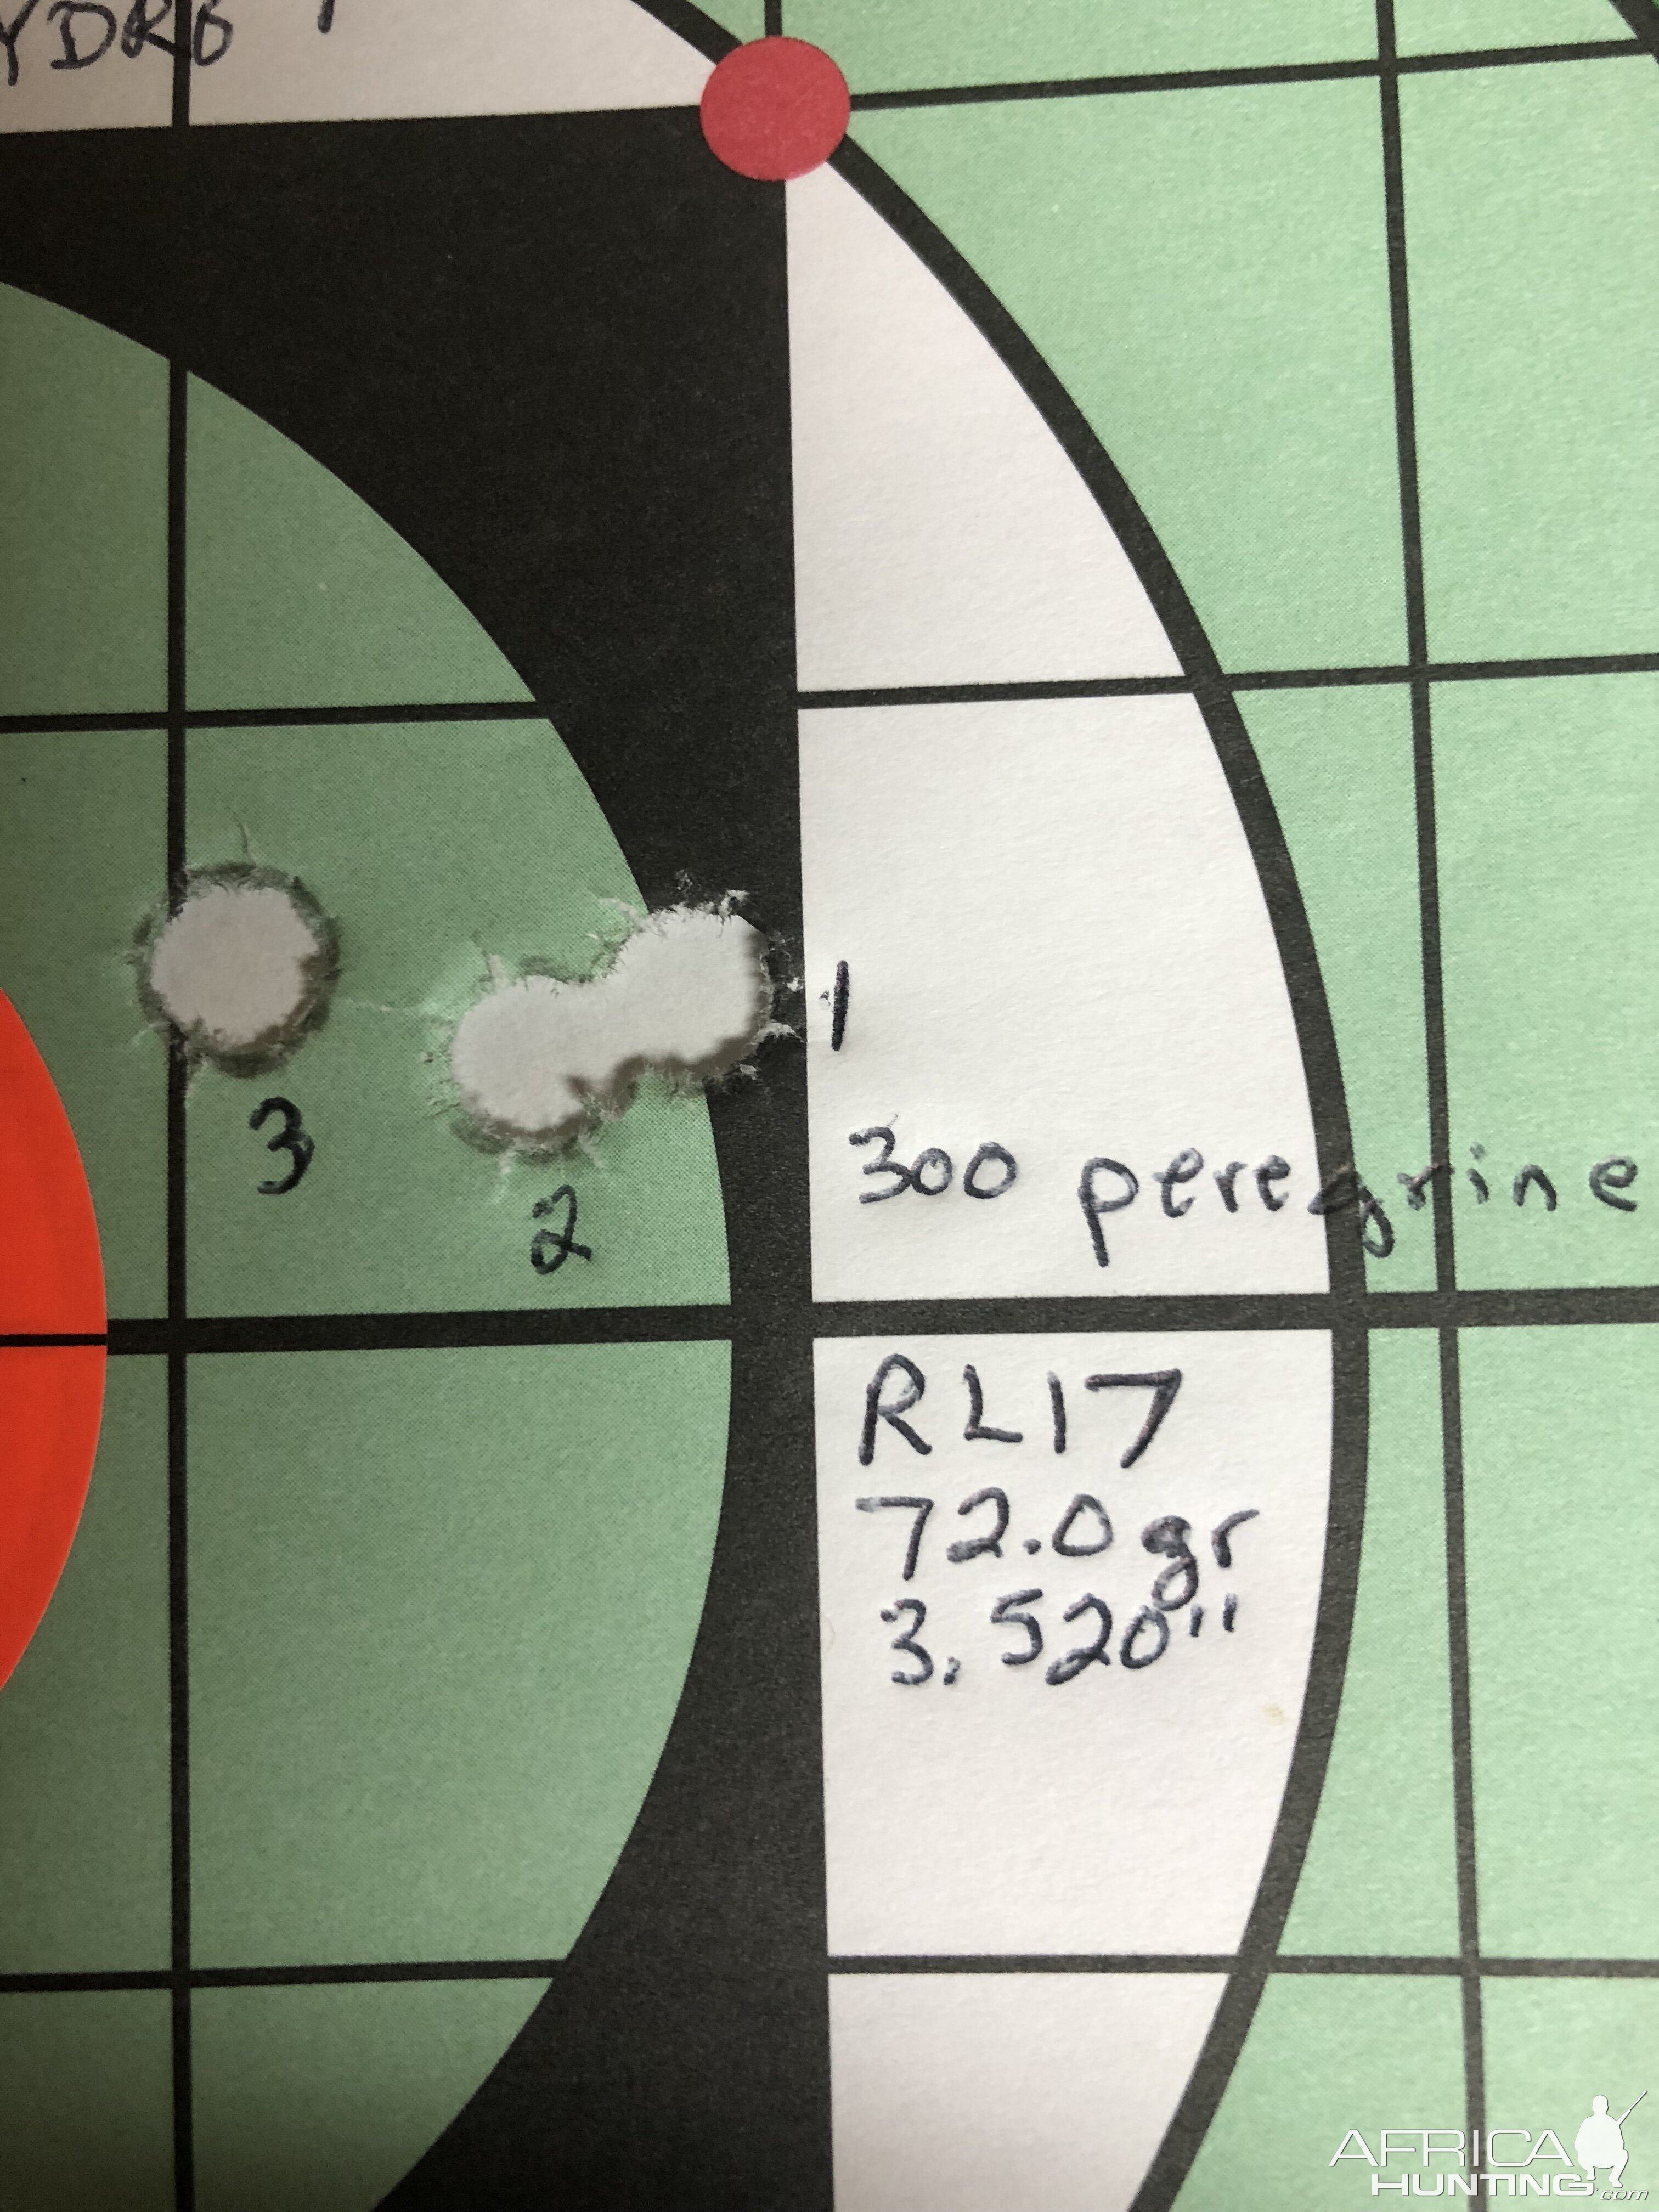 Range Shooting with 300 gr Peregrine and 72.0 RL17